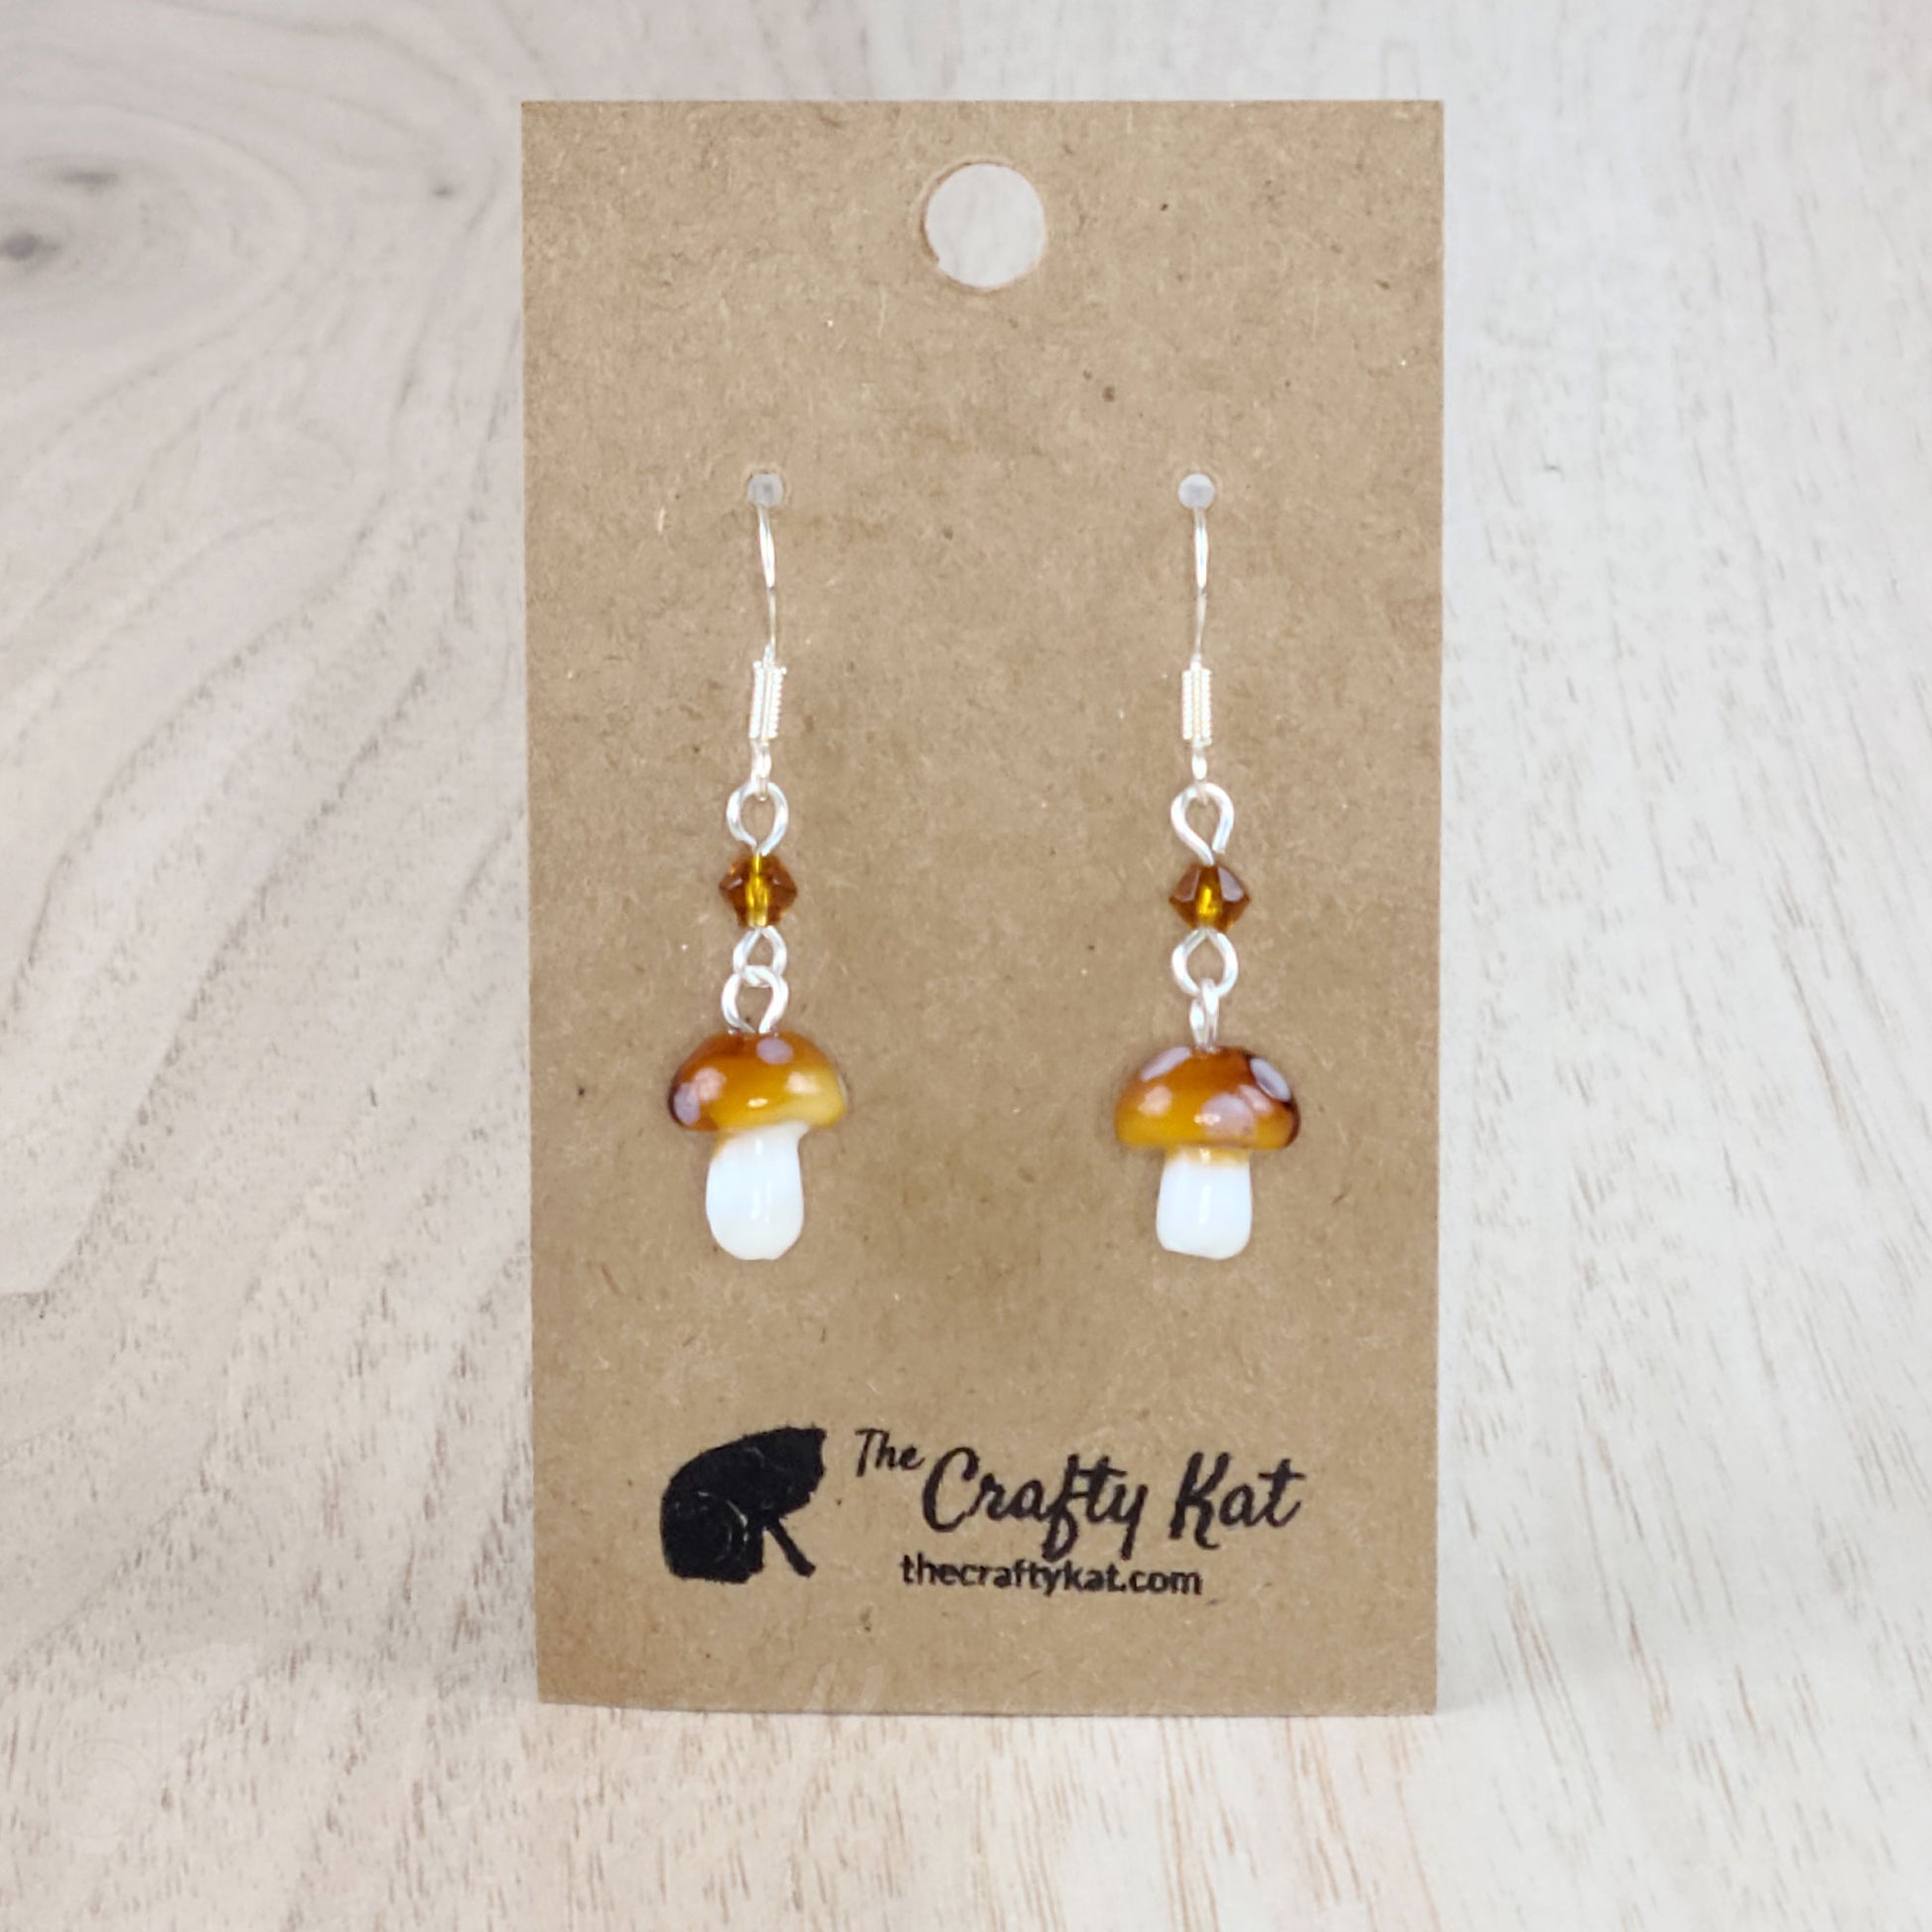 Mushroom-shaped tiered earrings made of lampwork and pressed glass beads with silver-plated base metal fittings. These mushrooms are amber with white spots.